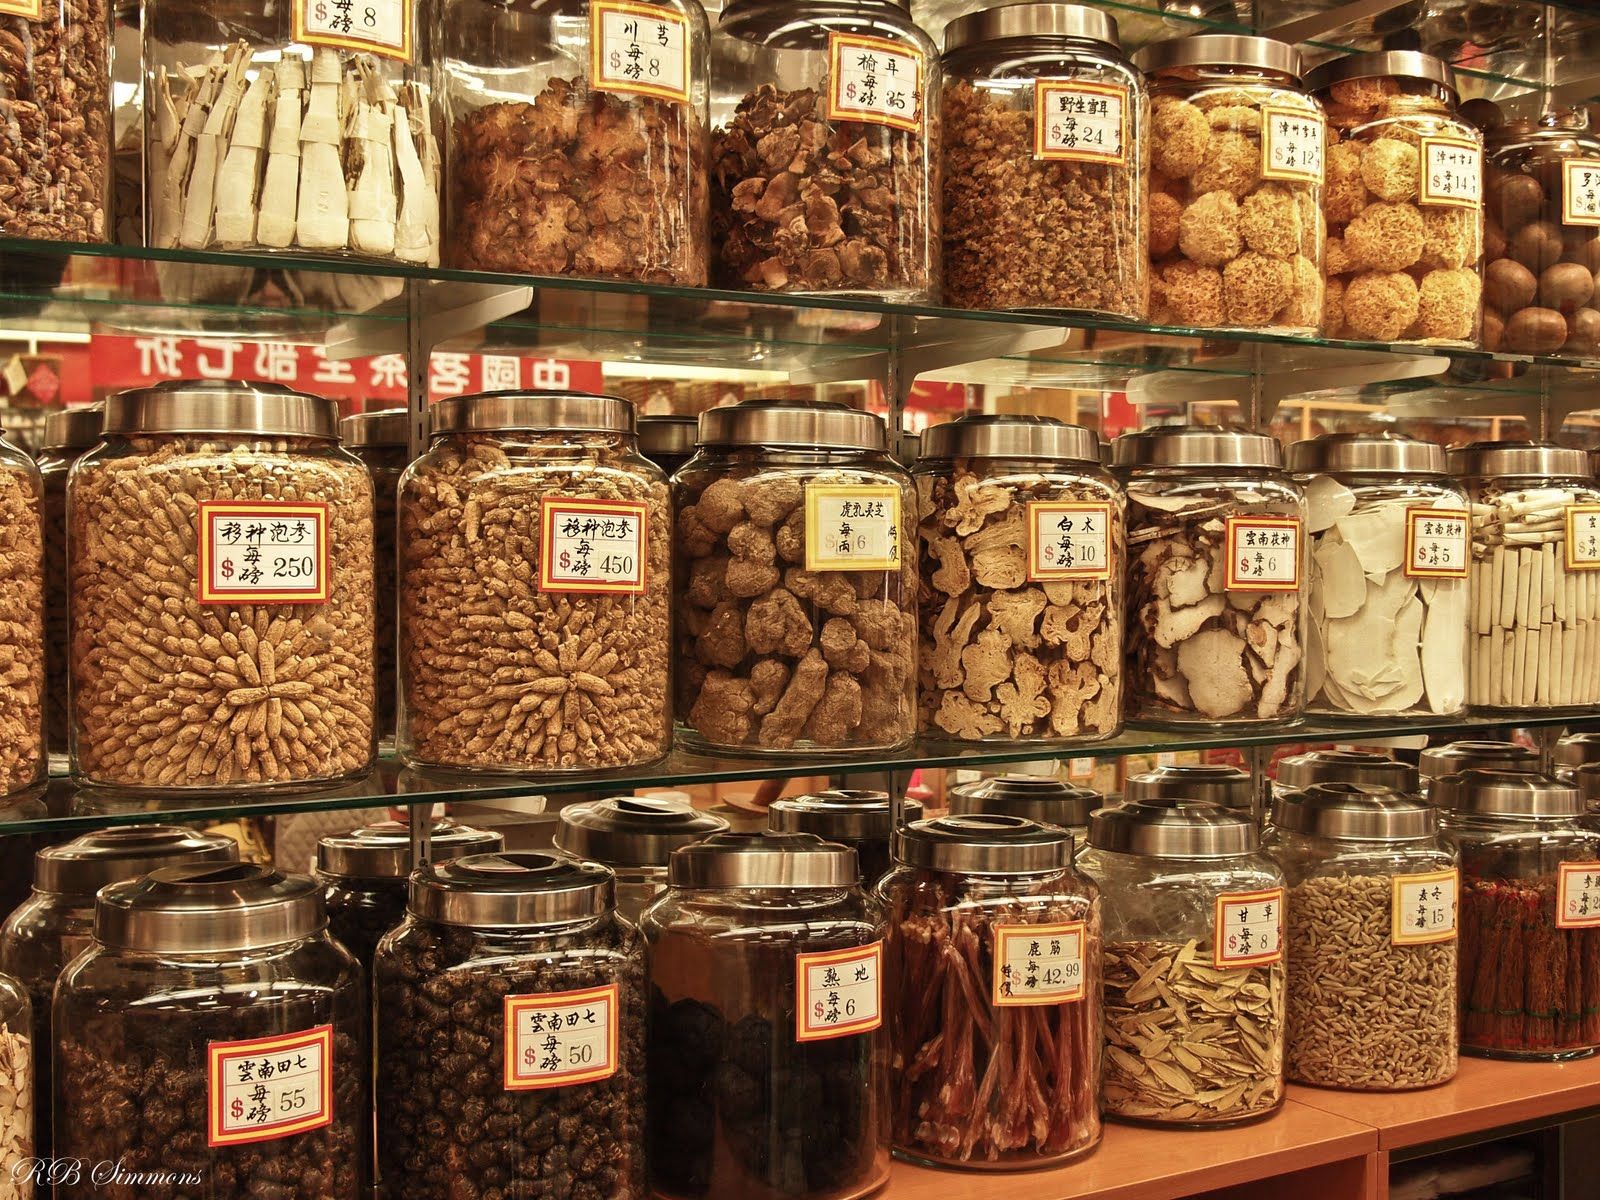 Healthy Chinese Herbal Medicine found in Tulsa Oklahoma